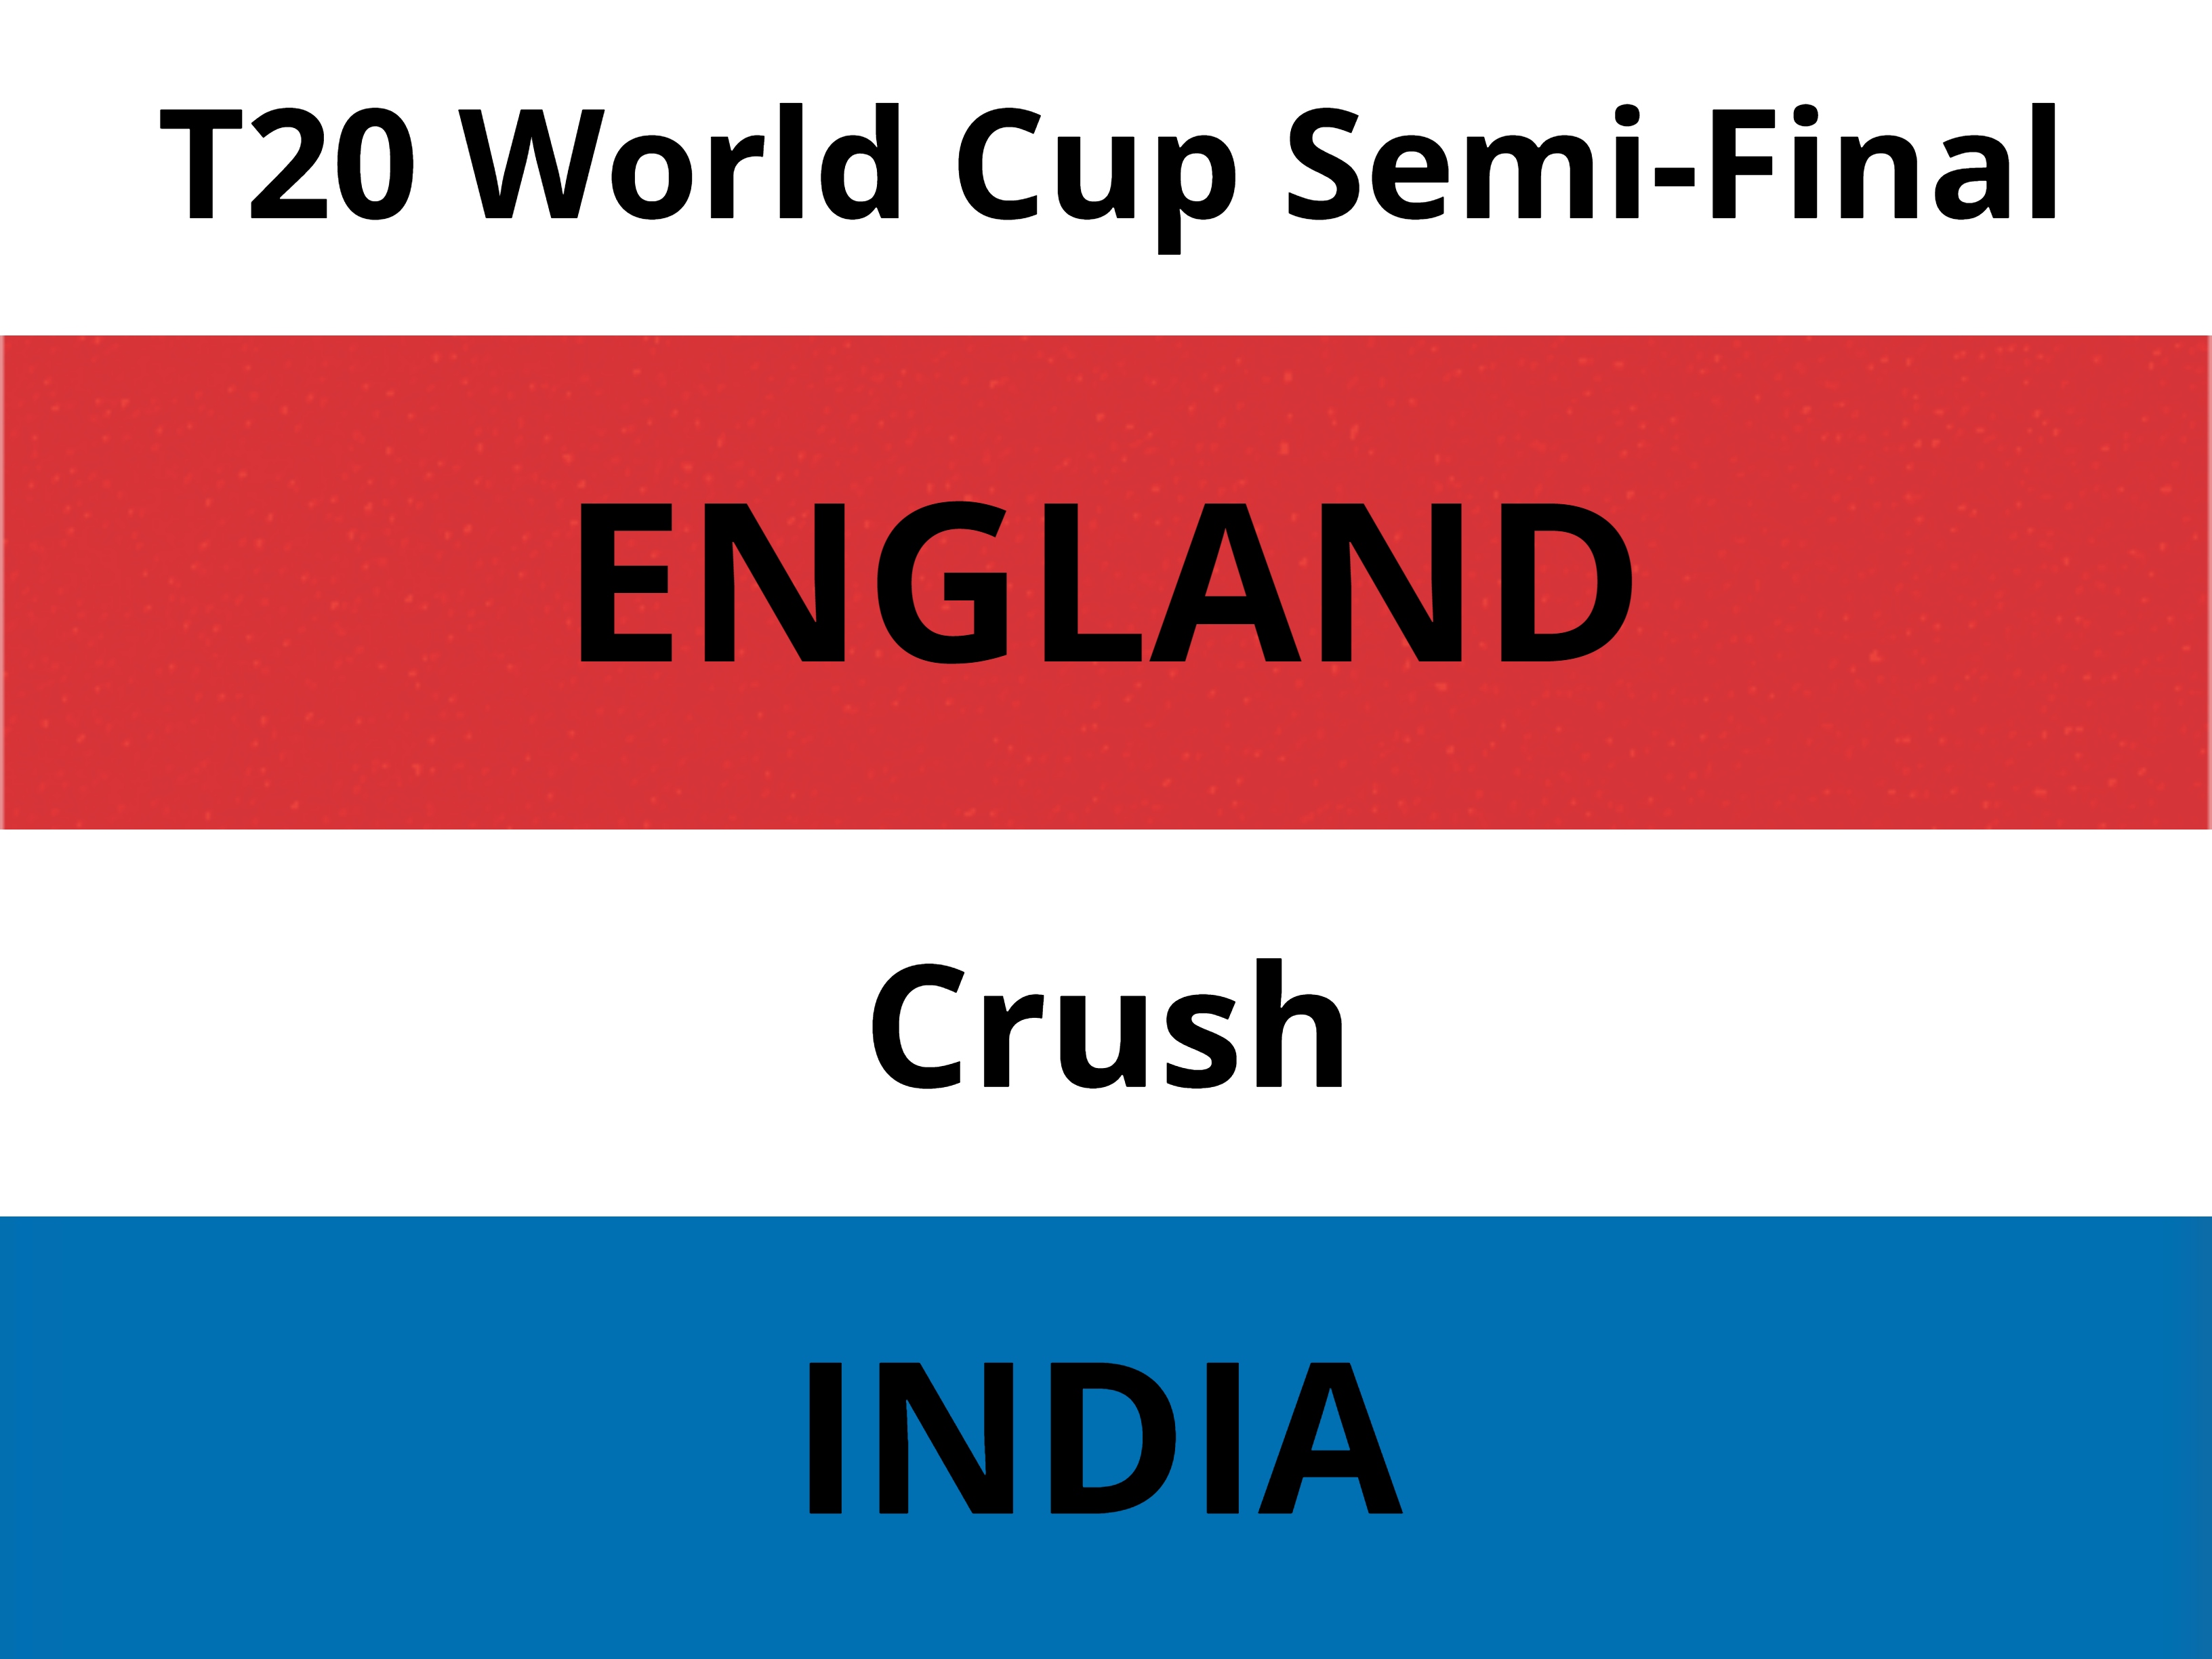 T20 World Cup: No Dream Finale - England Too Good For India